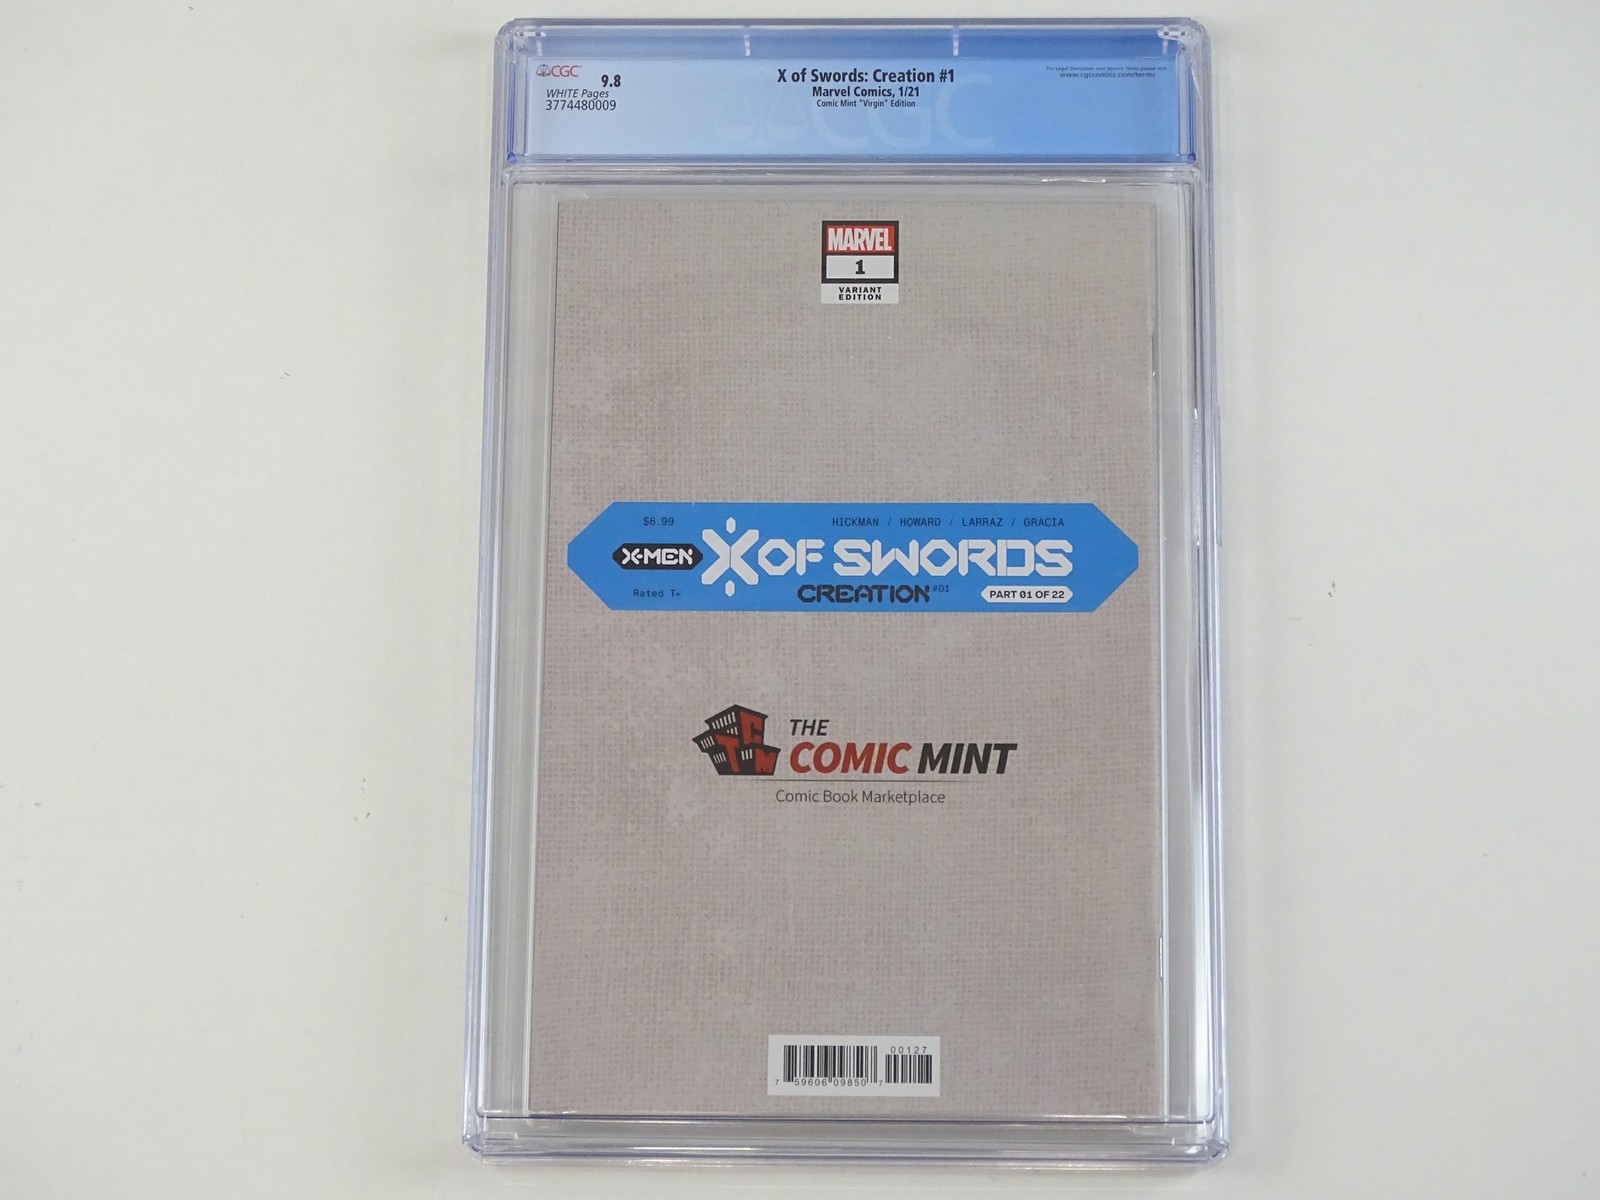 X OF SWORDS : CREATION #1 - (2021 - MARVEL) - GRADED 9.8 by CGC - Mint 'virgin' edition -Jonathan - Image 2 of 5